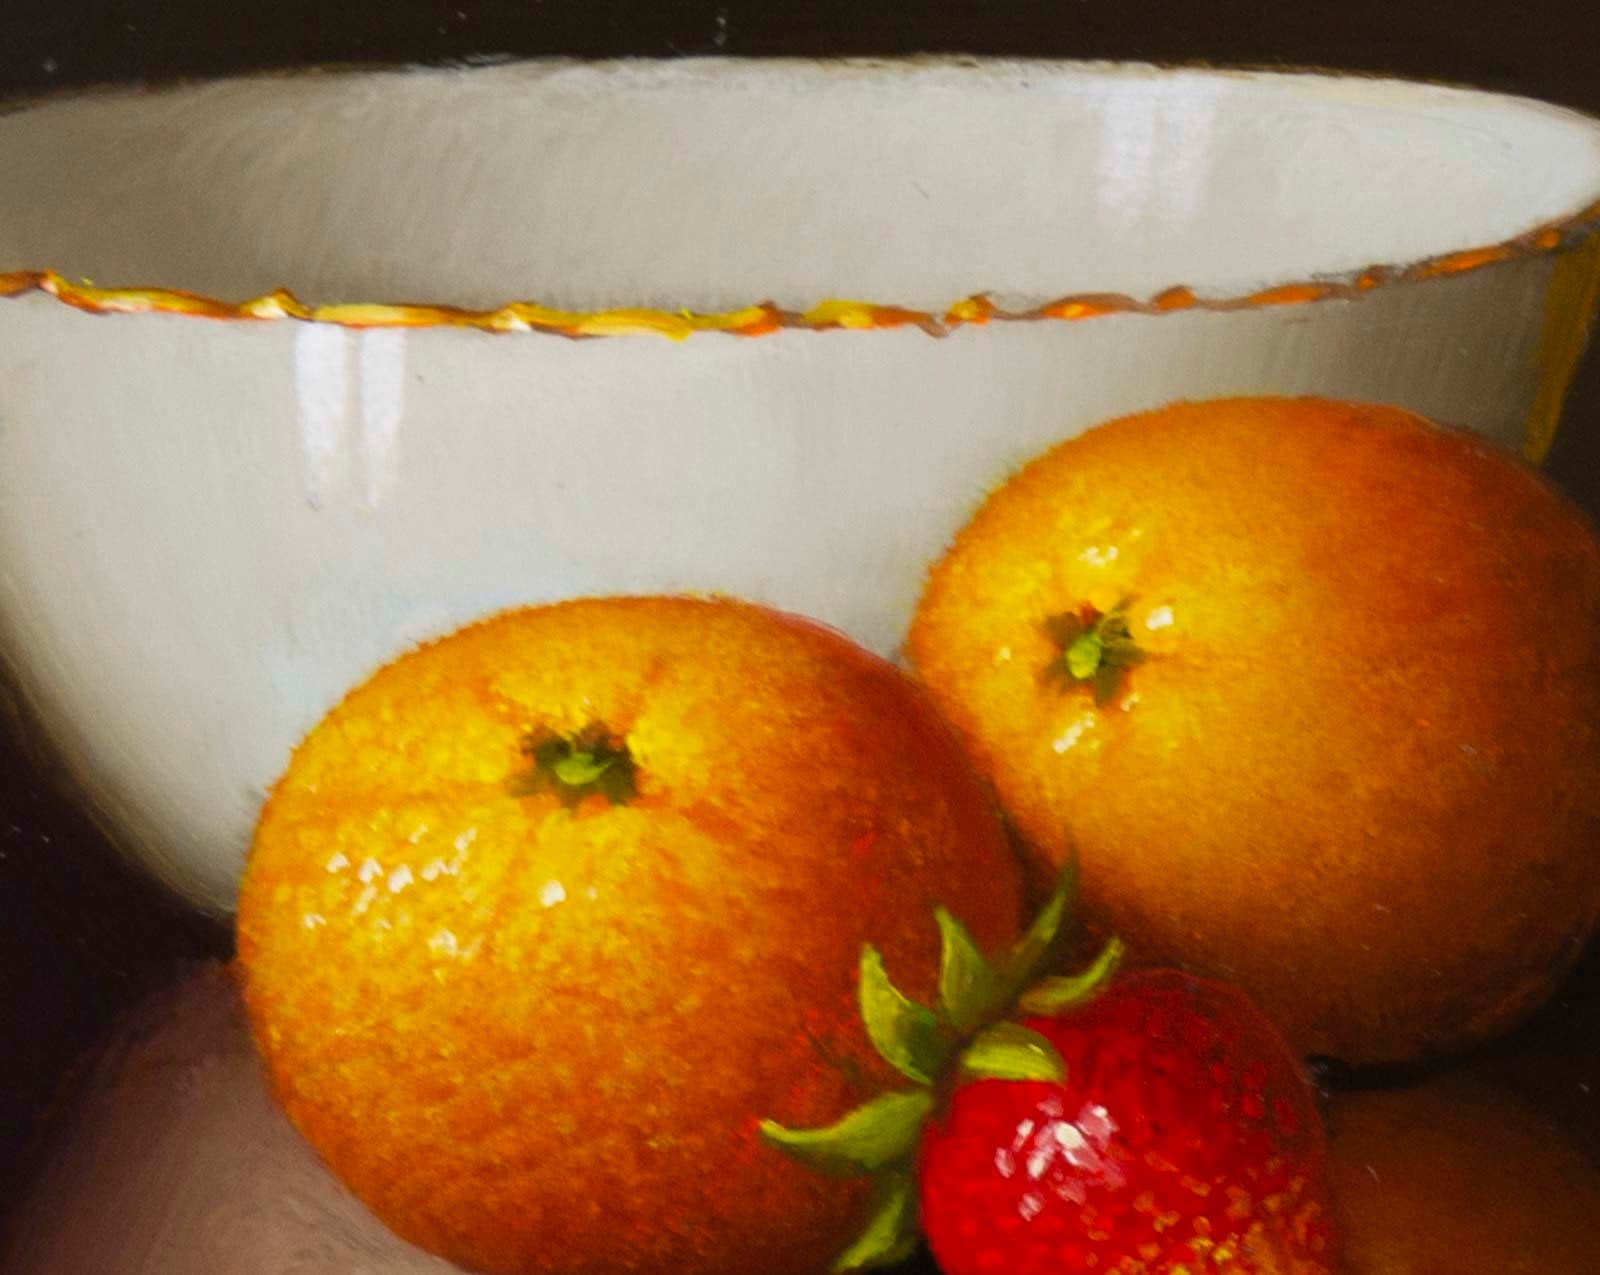 Oranges with Bowl